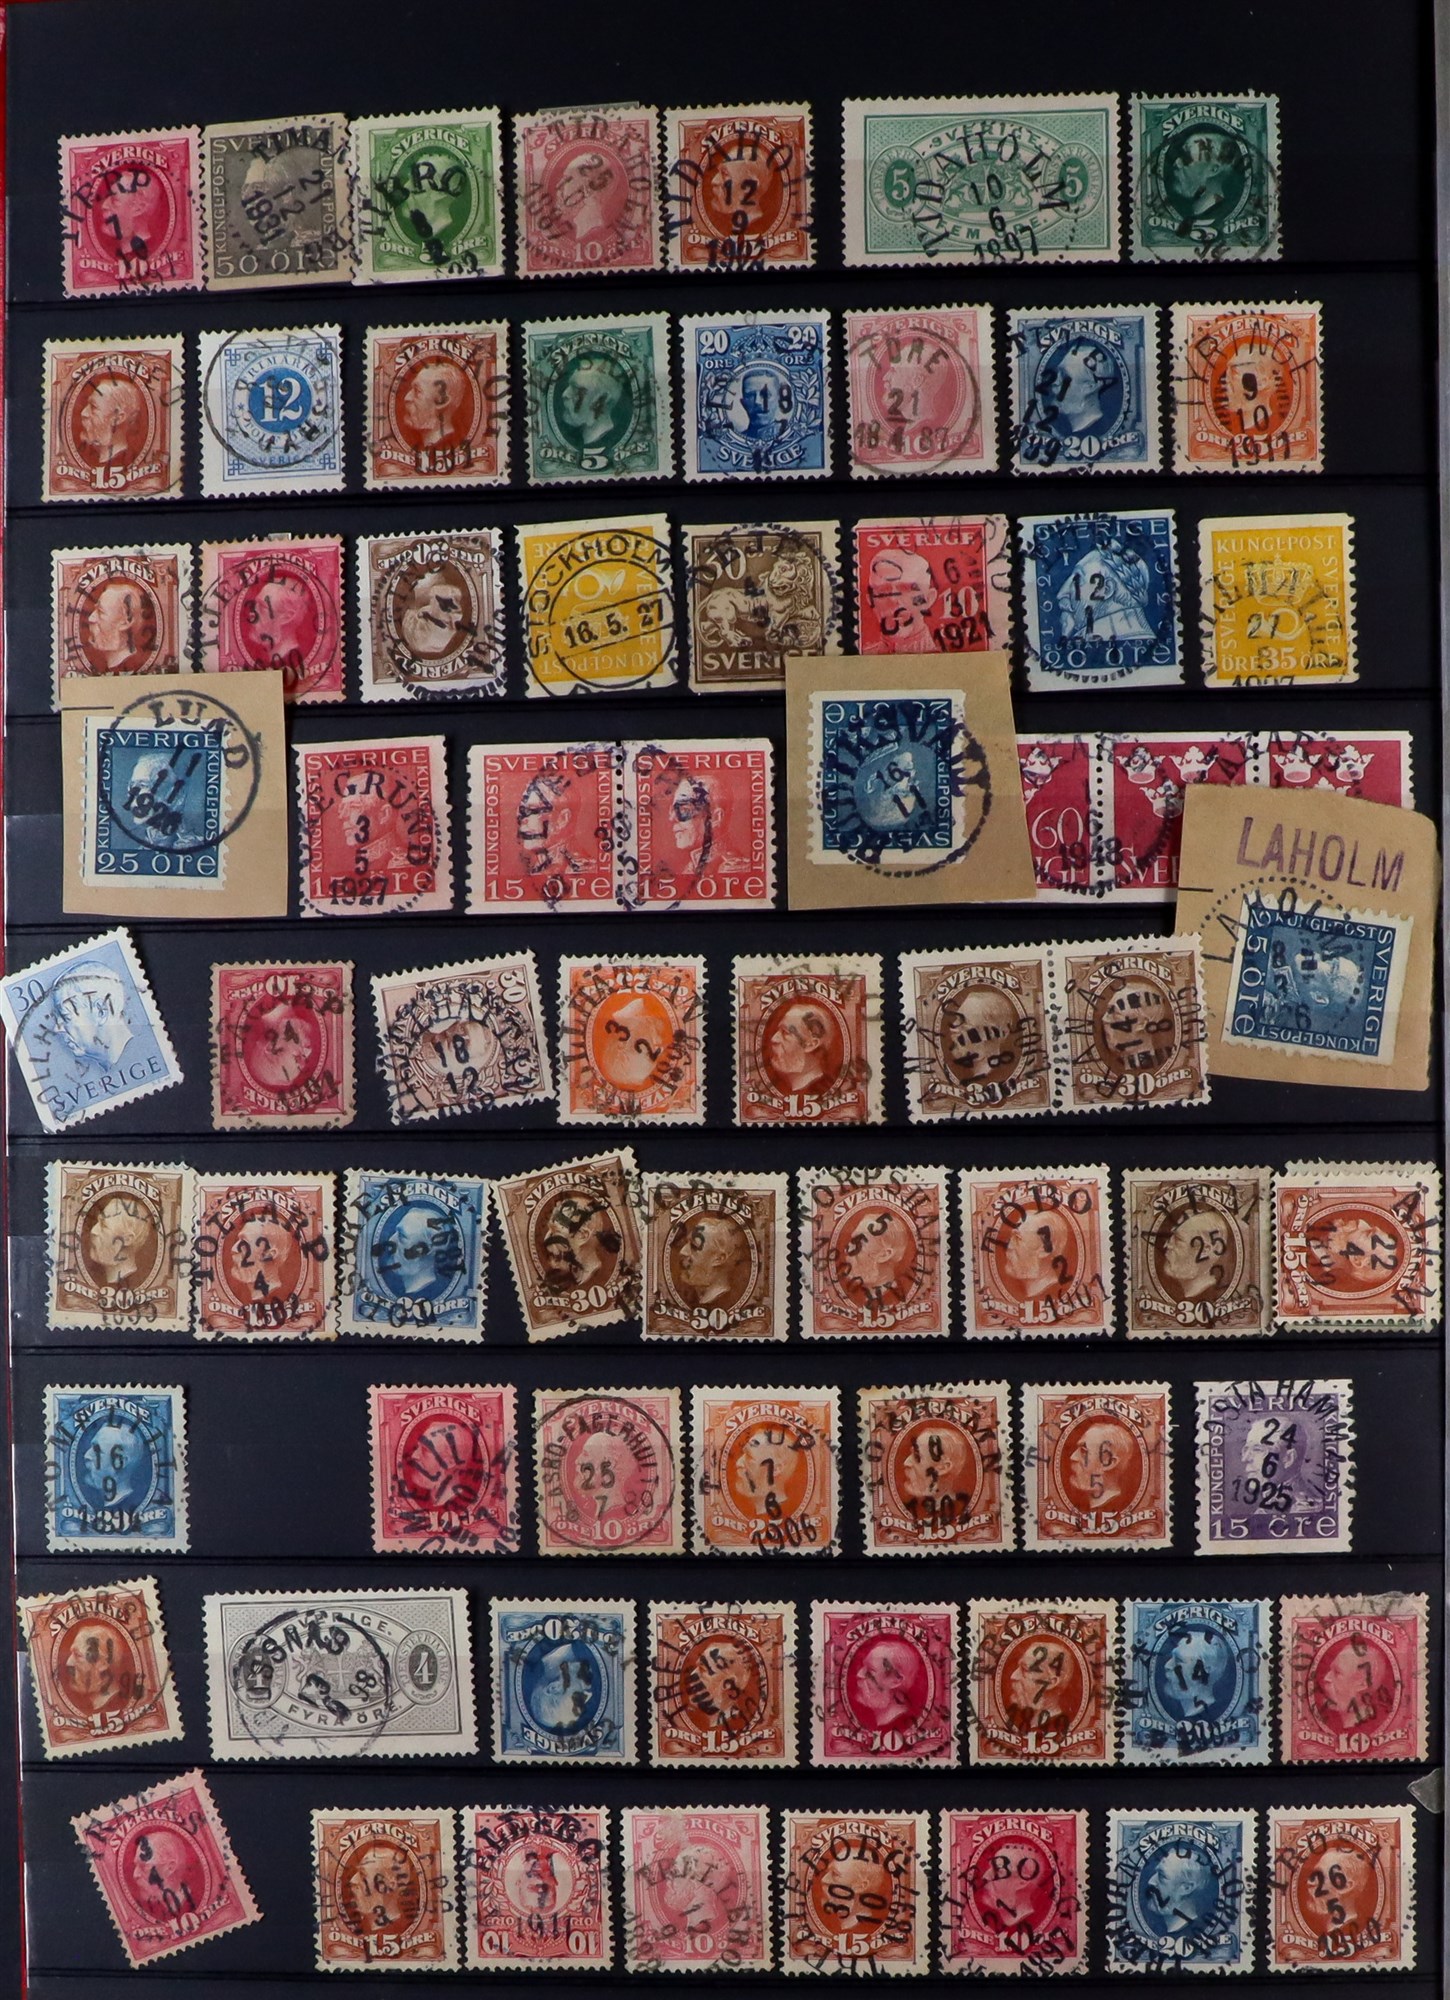 SWEDEN POSTMARKS Mostly 1880's-1950's used stamps selected for nice cancels, mostly with superb - Image 9 of 11